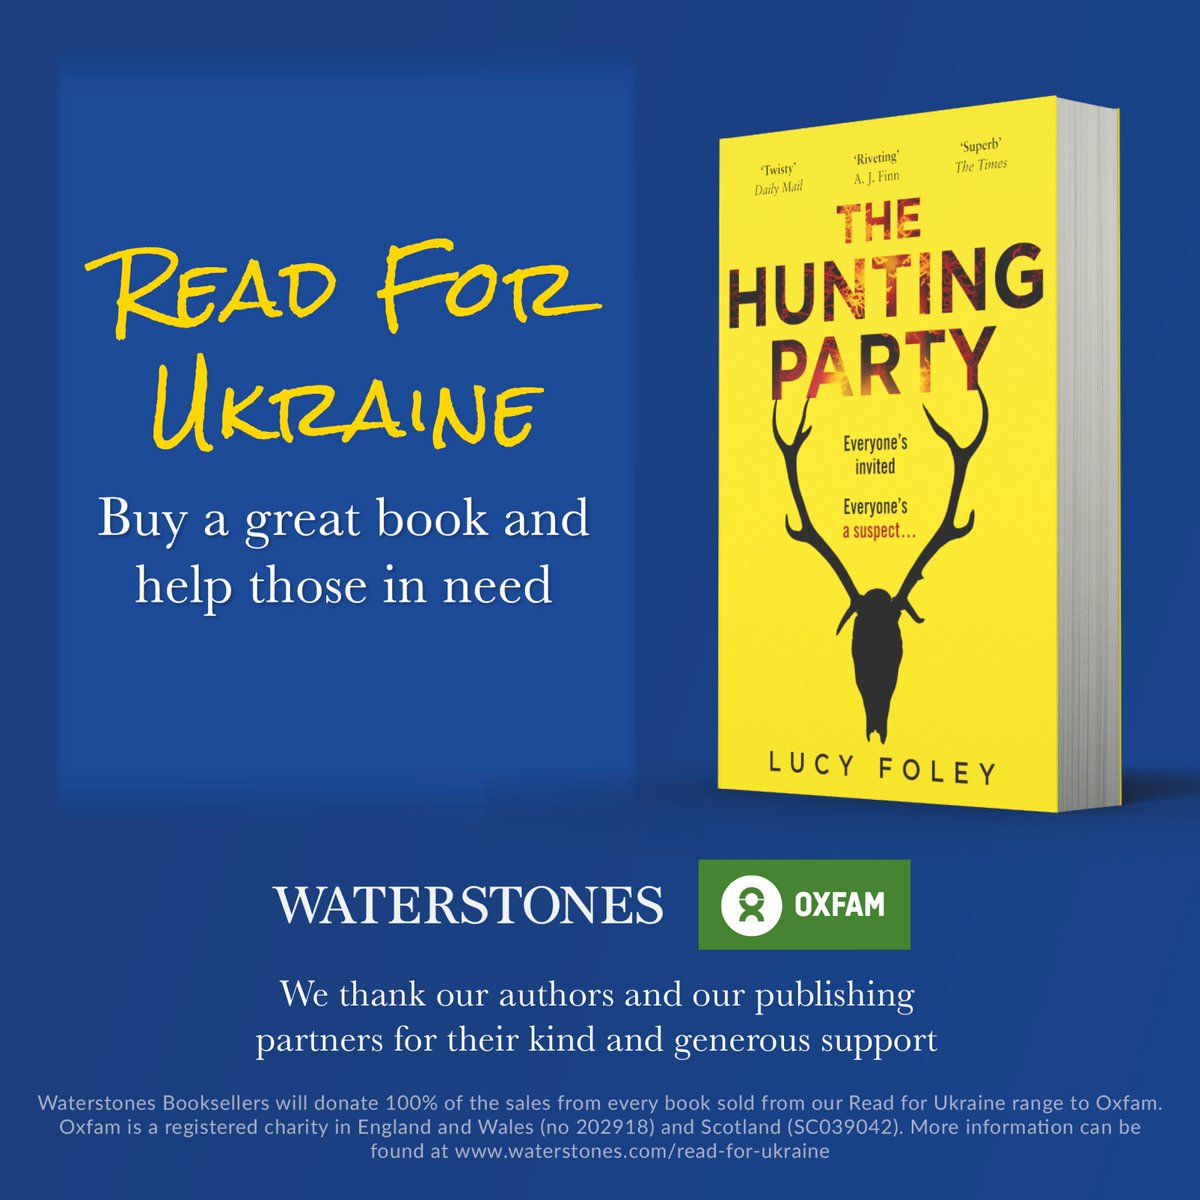 100% of the proceeds will support the great work of @oxfamgb. waterstones.com/read-for-ukrai…

A huge thank you to both @JoannaCannon and @lucyfoleytweets, who have generously sacrificed their royalties to support this cause! 
#ReadForUkraine #TheTroublewithGoatsandSheep
#TheHuntingParty